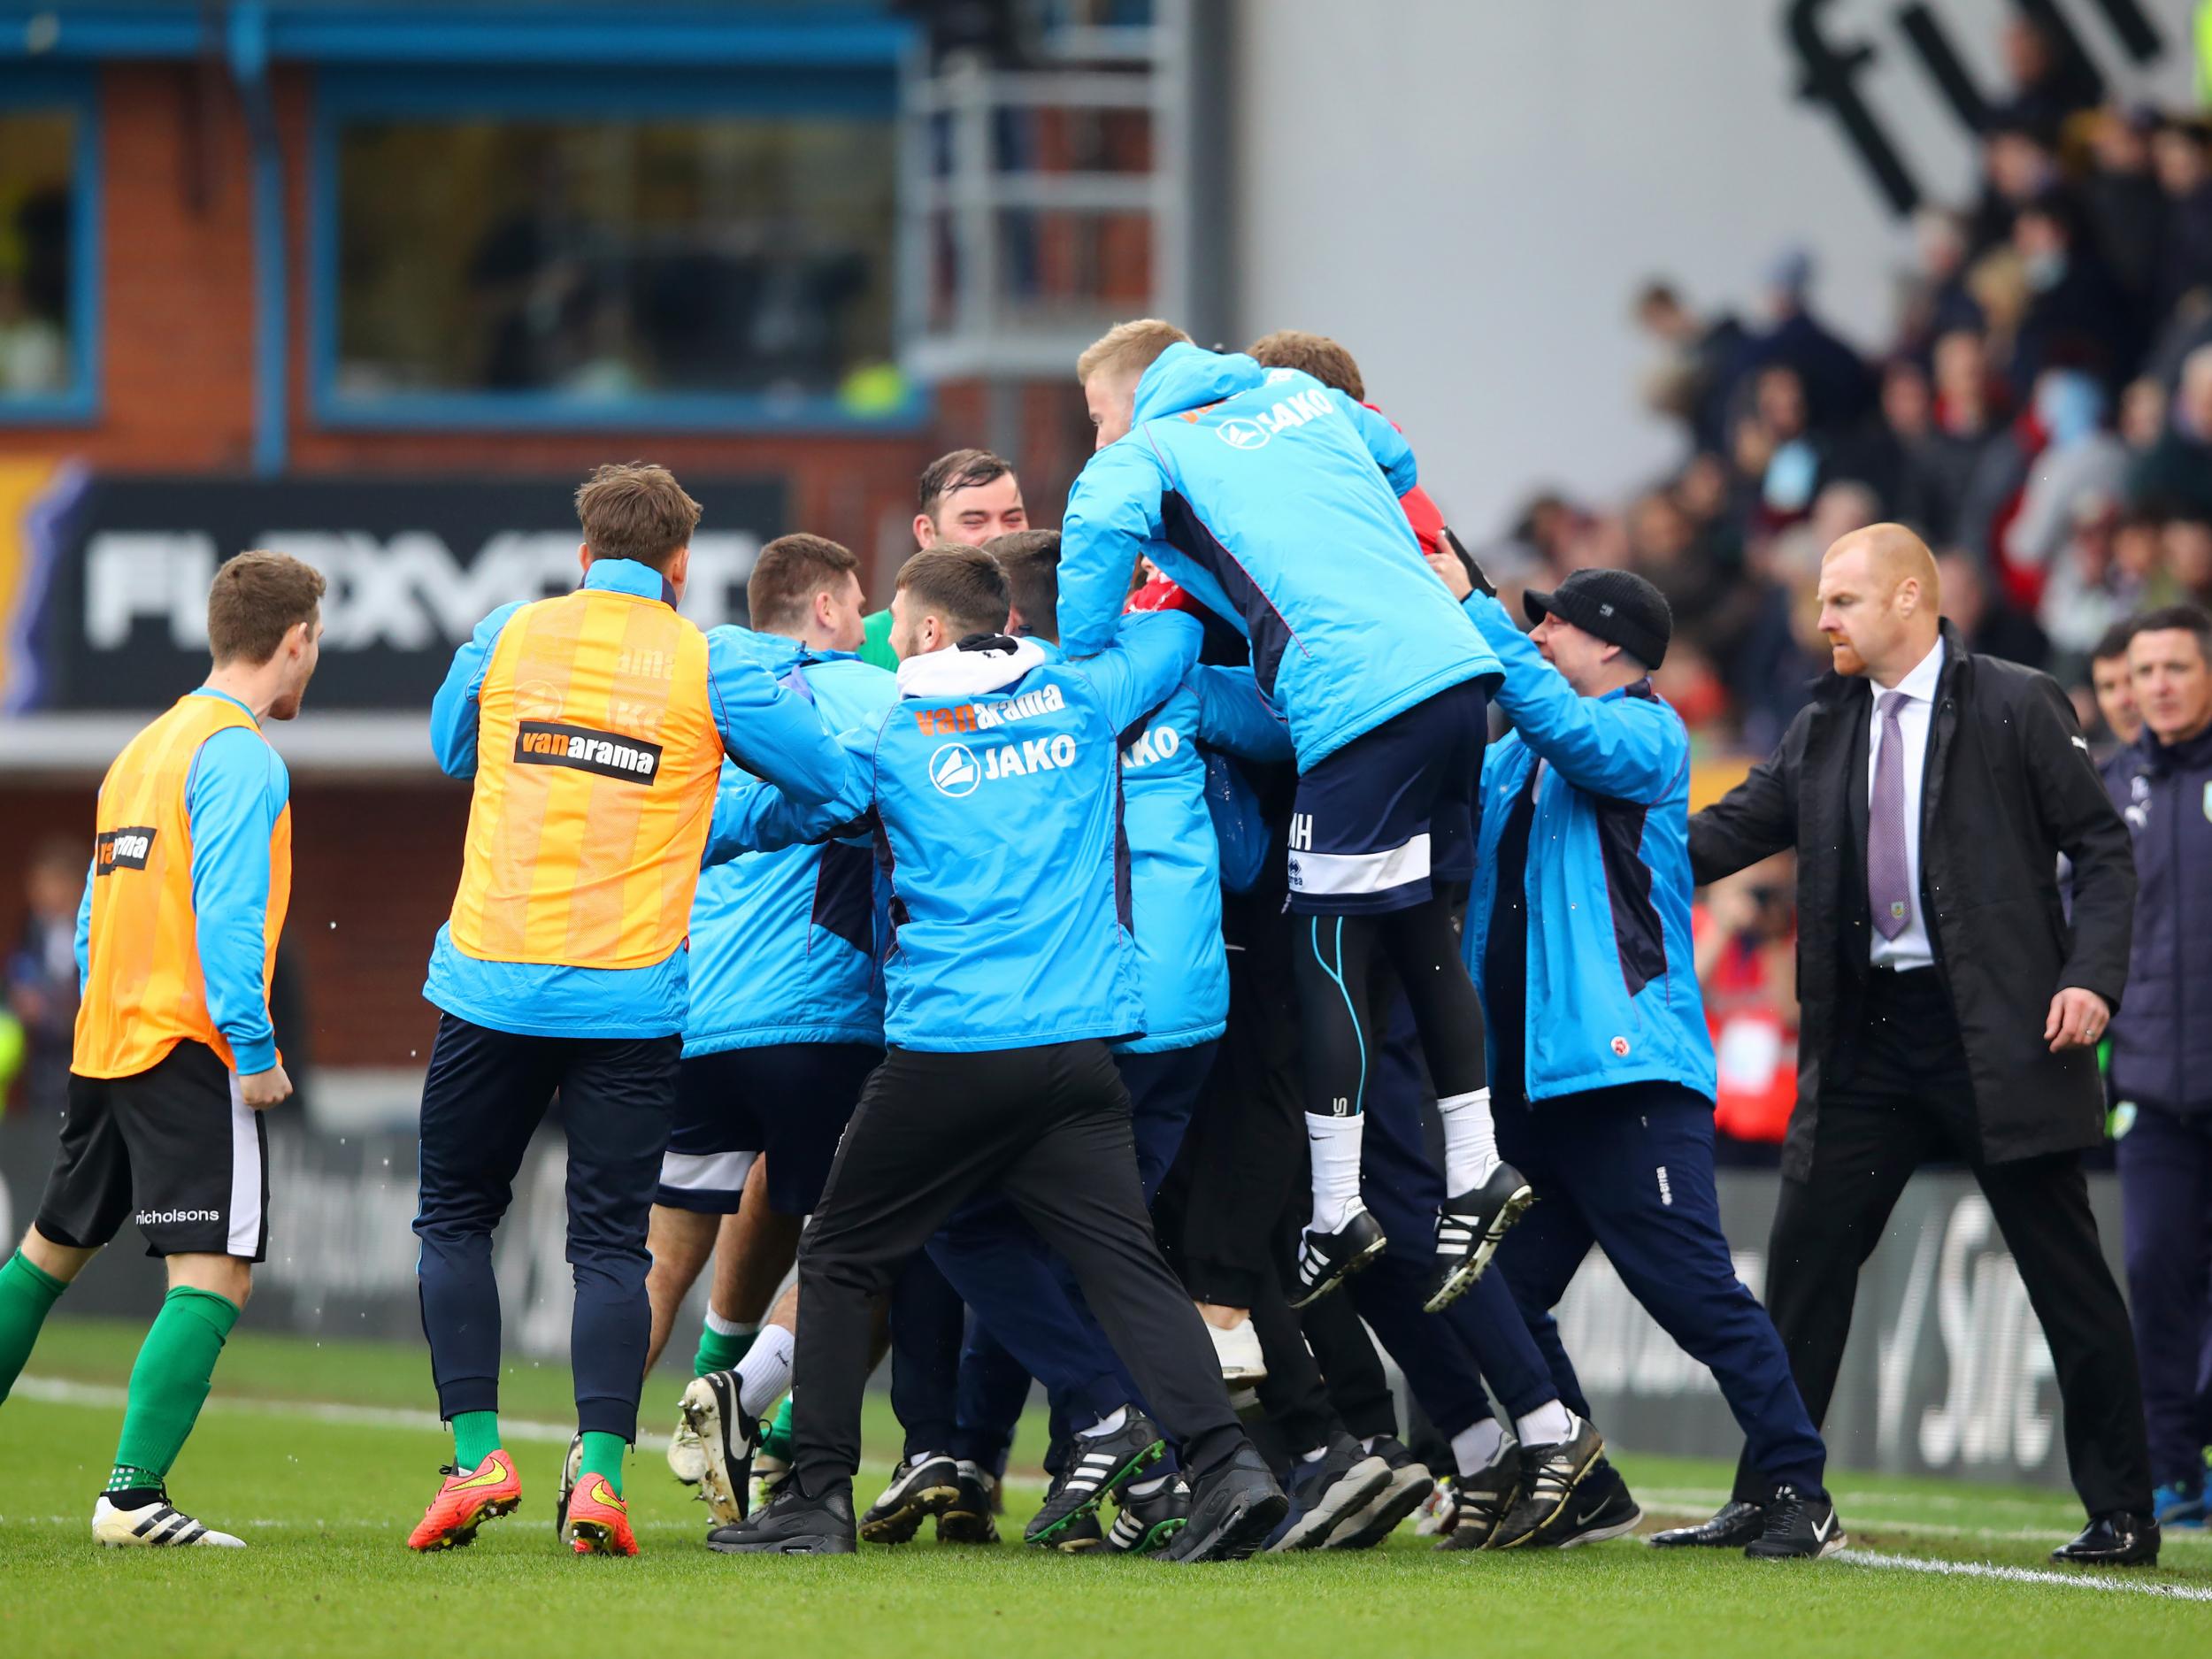 Lincoln's players celebrate their historic Cup win